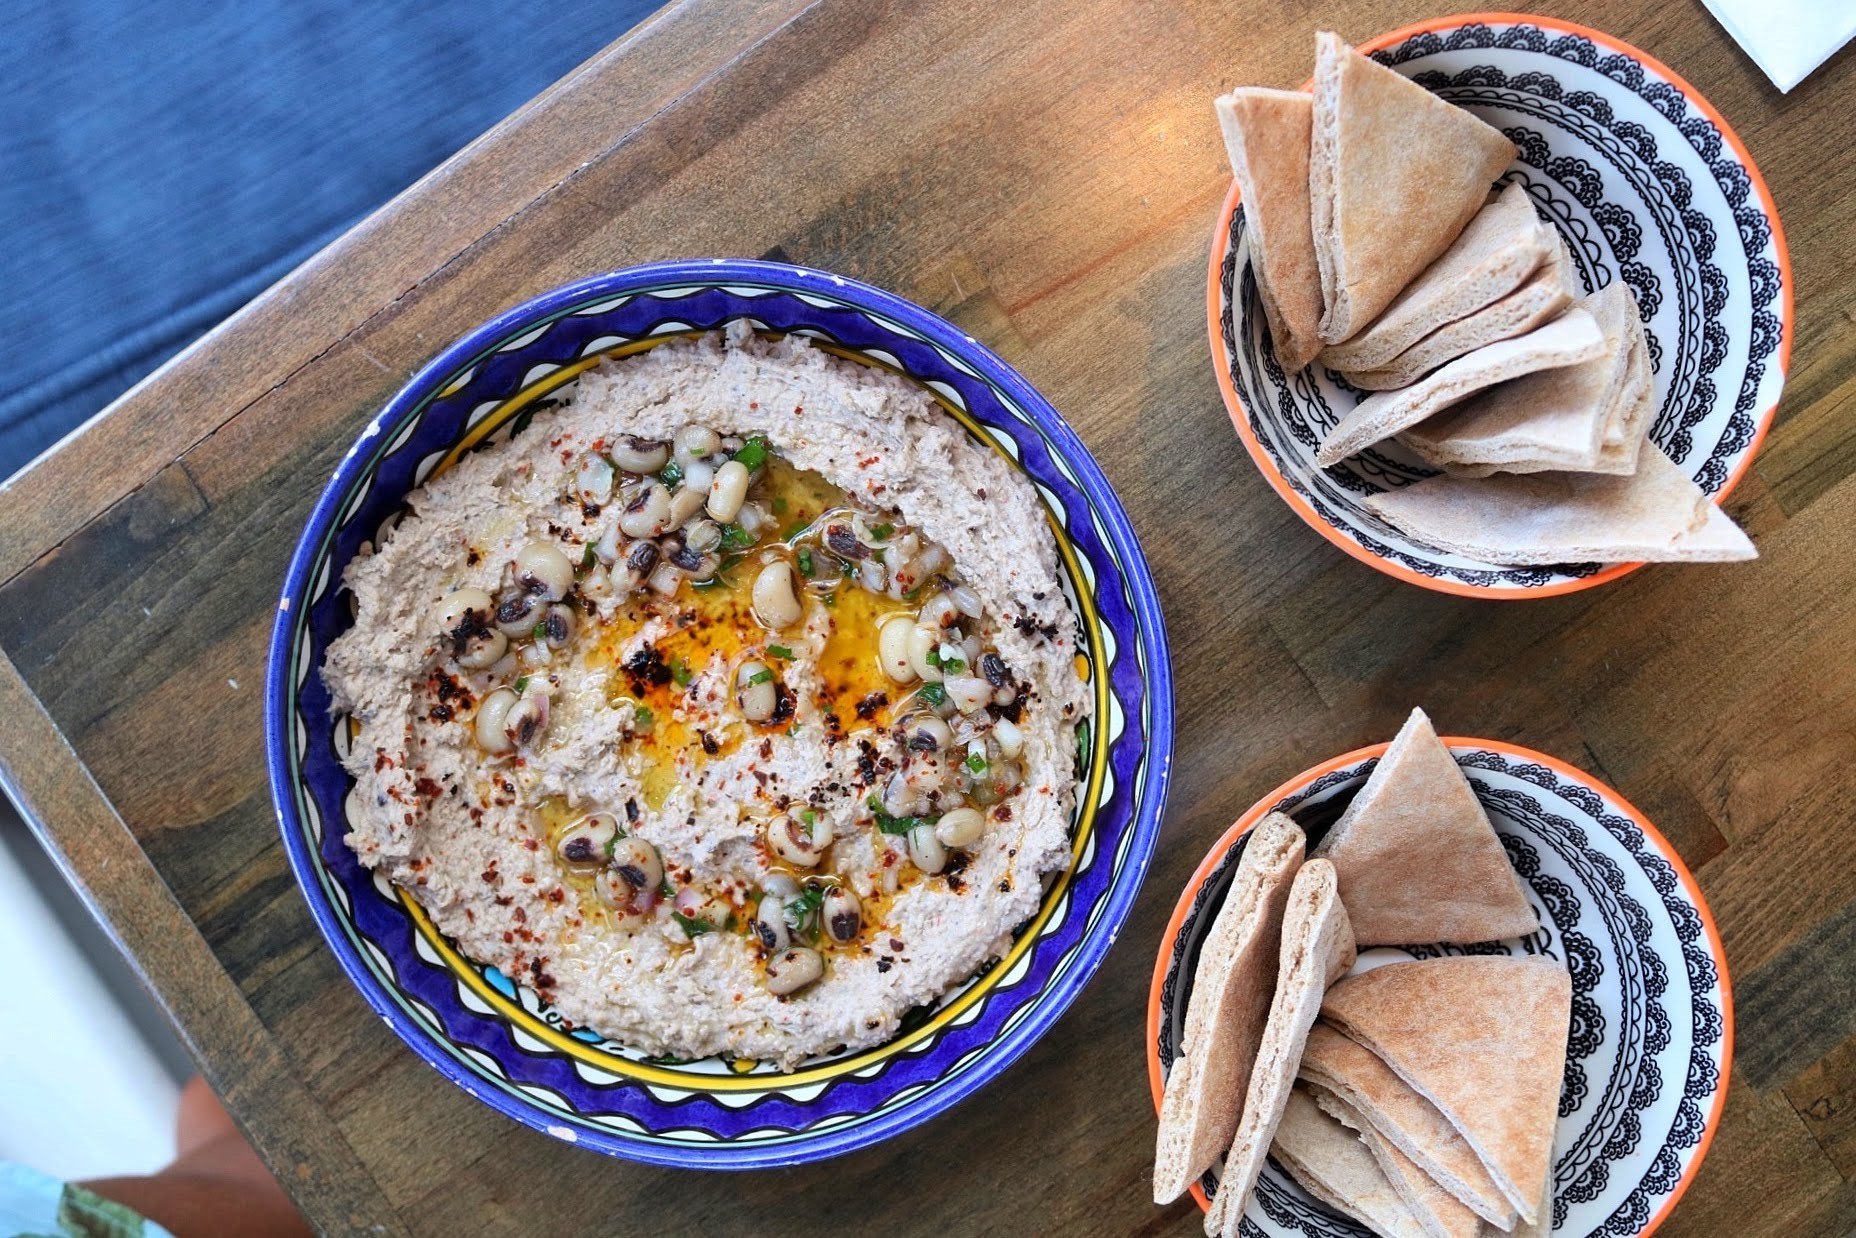 The hummus from Emma's Torch features black-eyed peas, inspired by flavors from the American South.